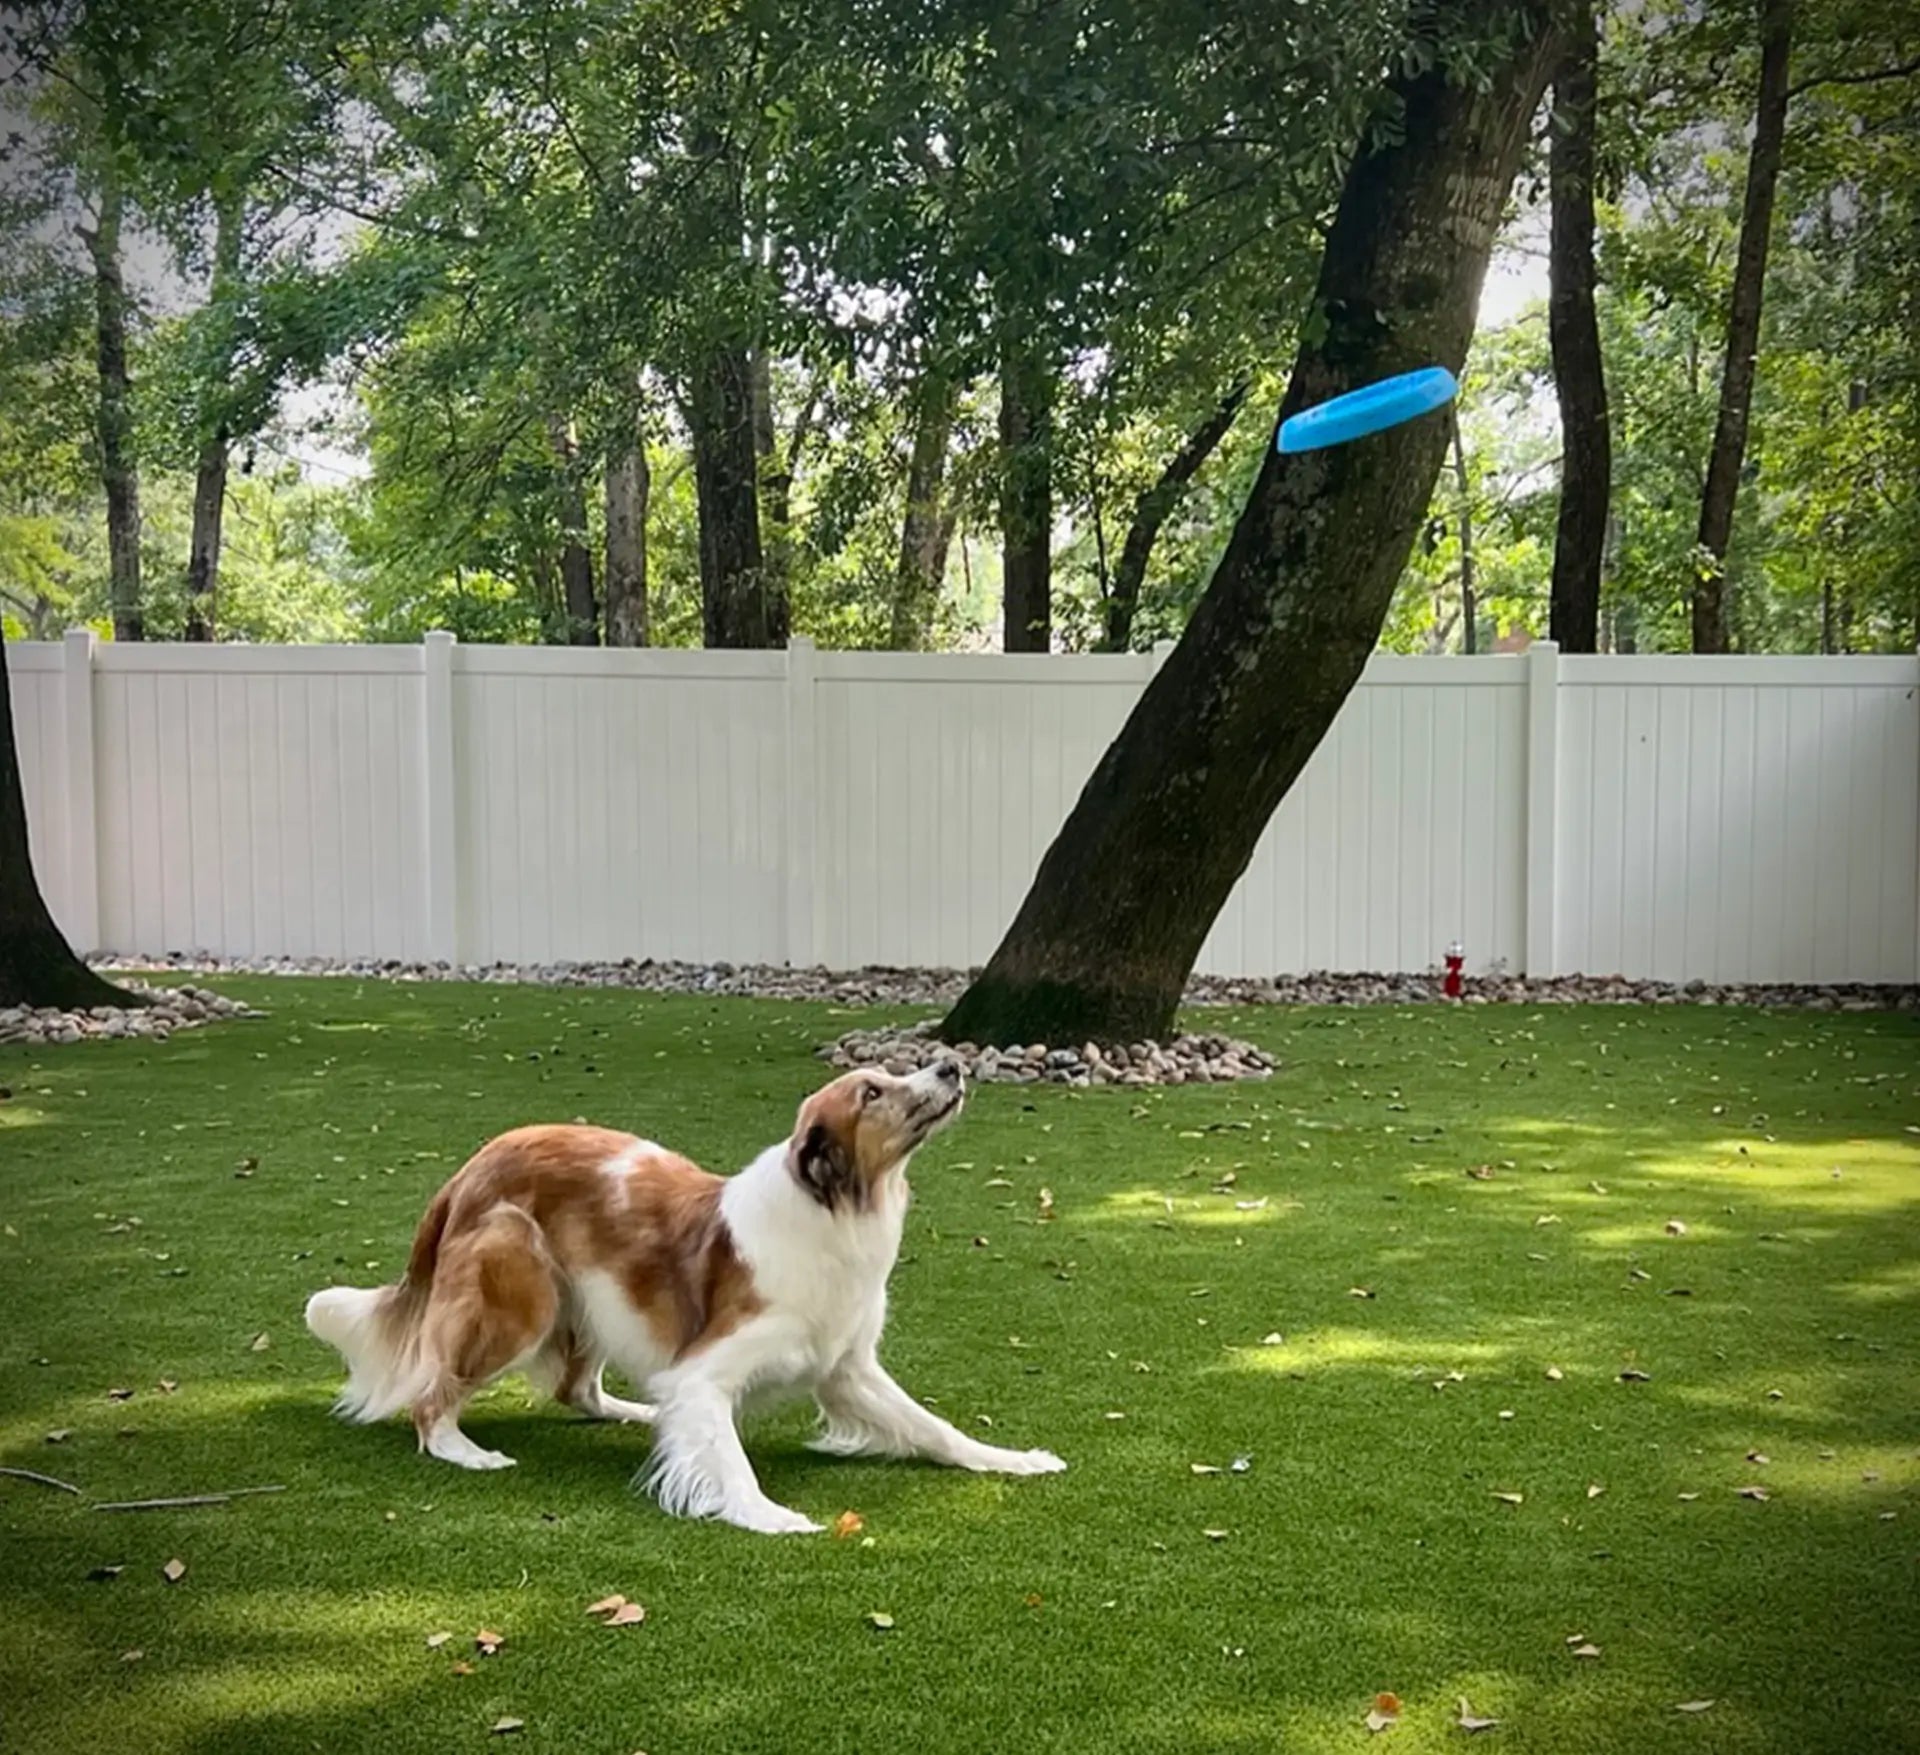 Border Collie is about to jump and catch a blue dog frisbee.